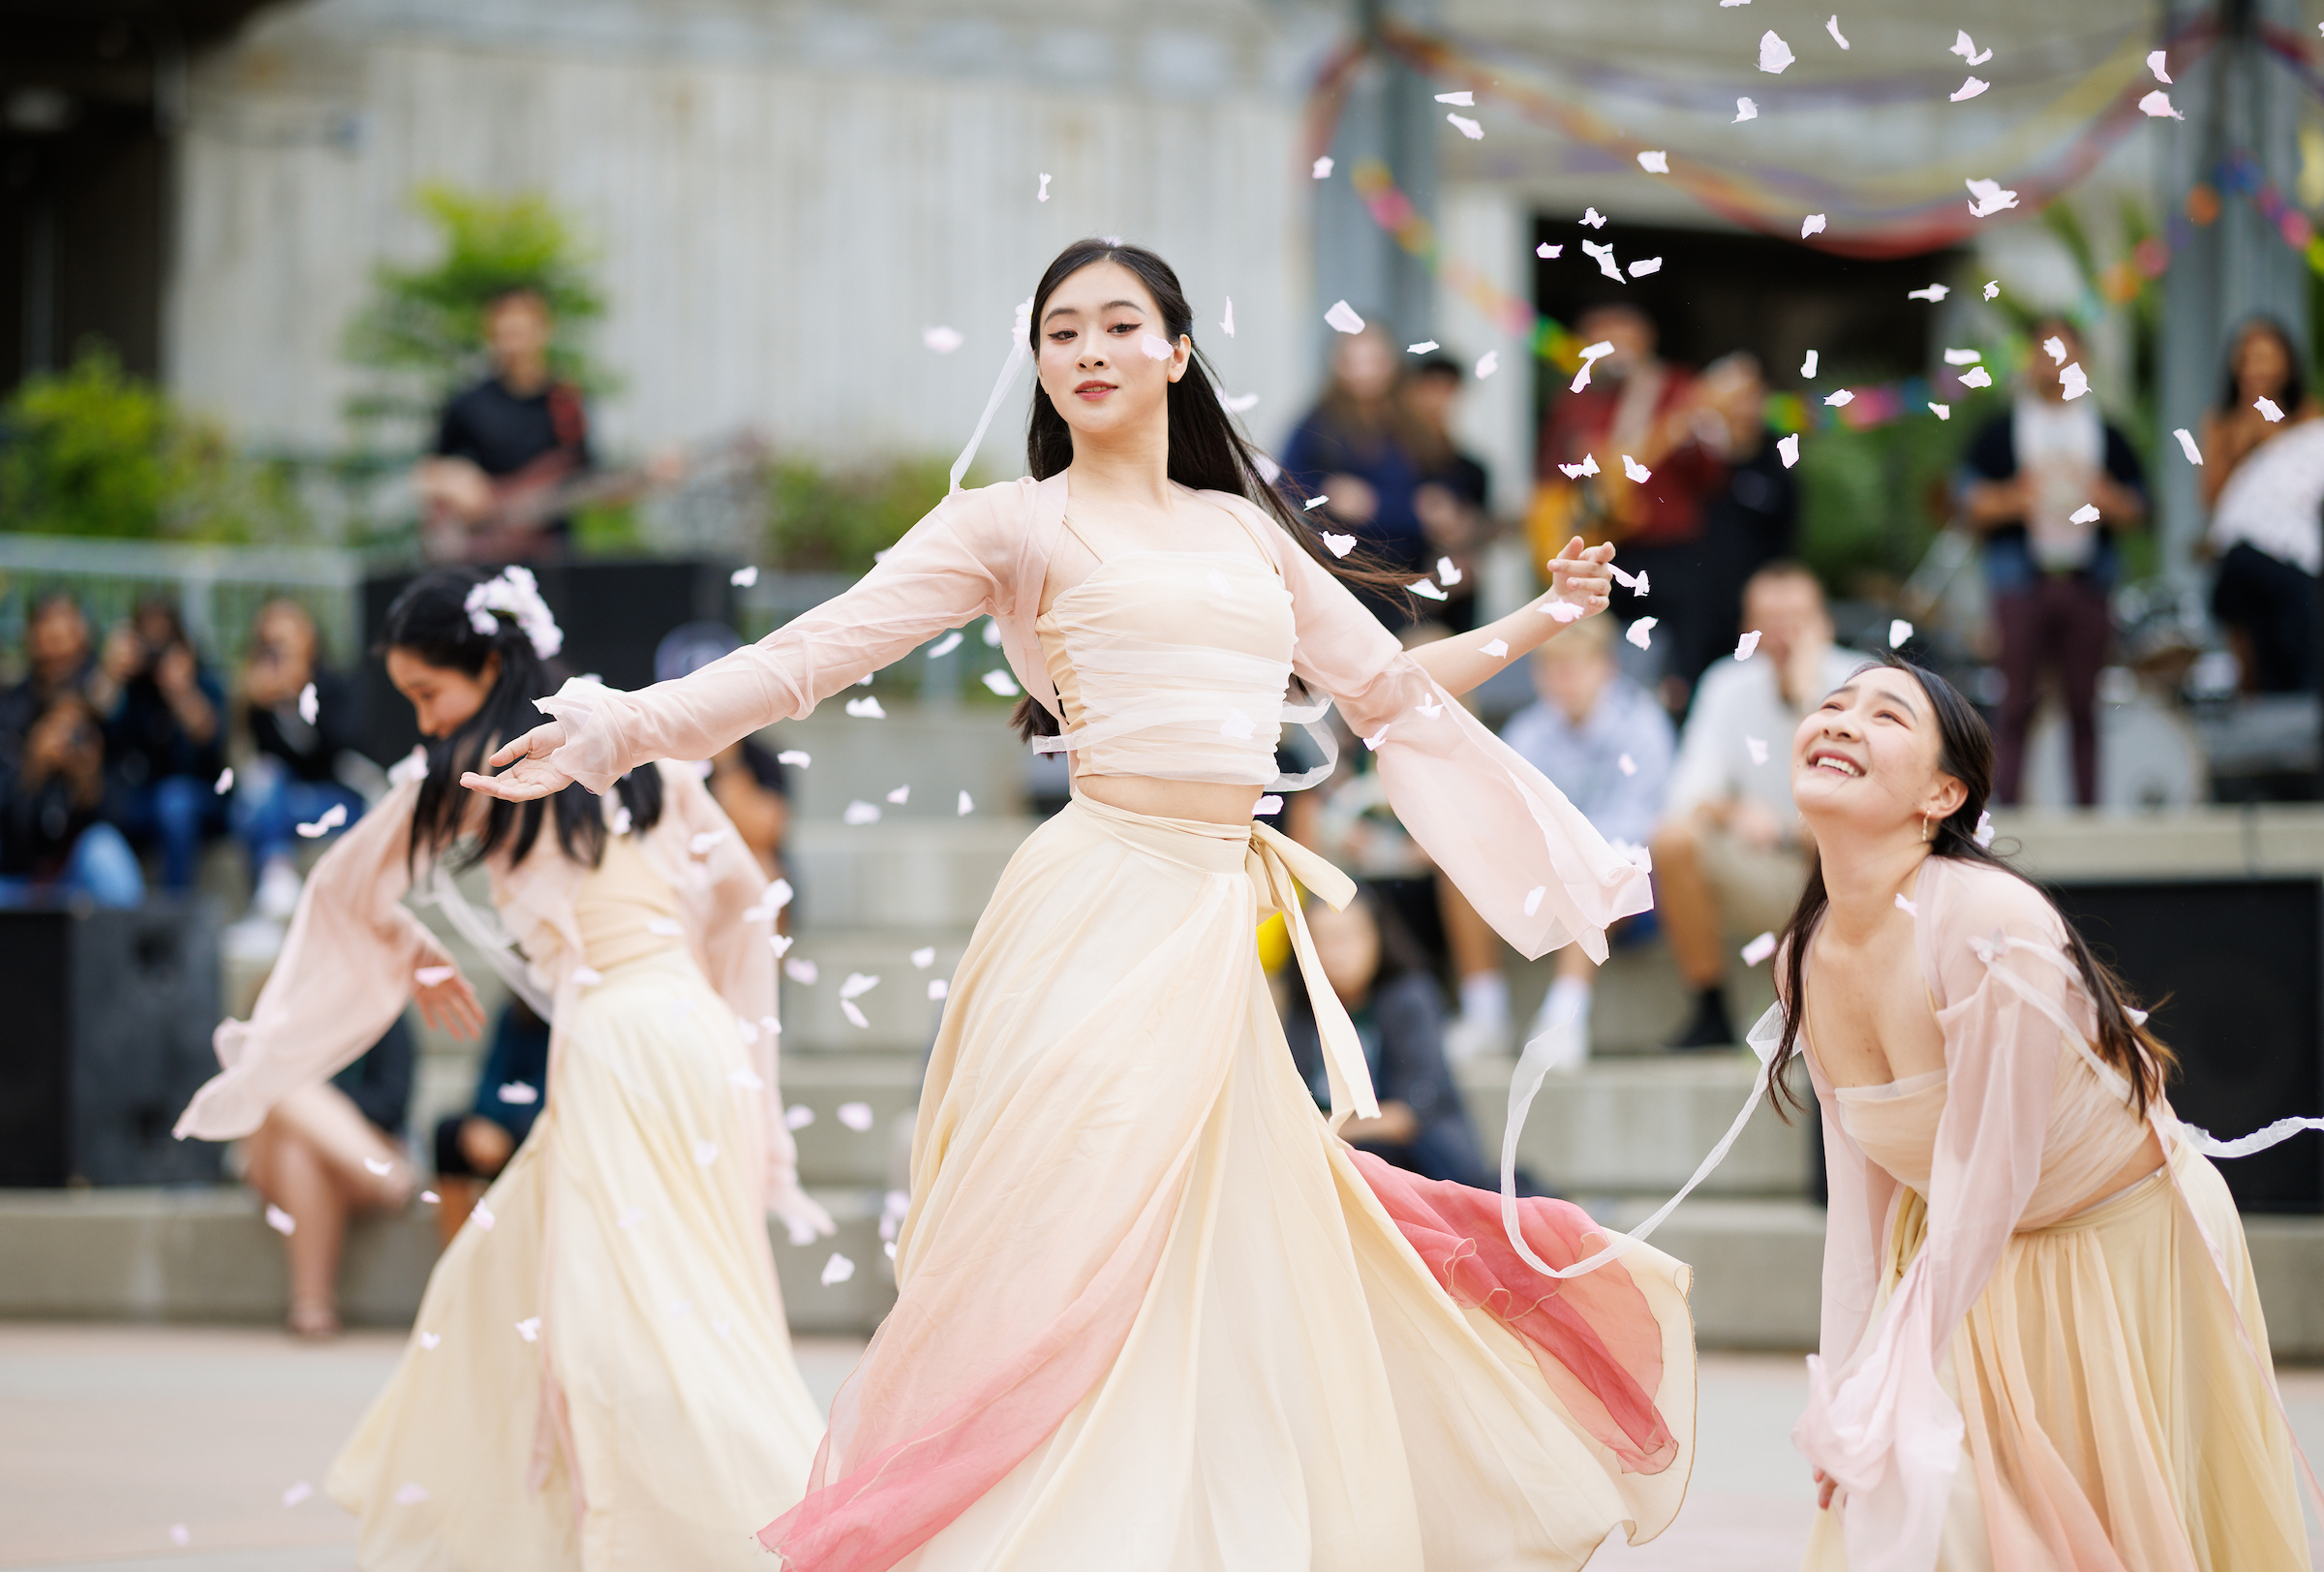 Students in light pink dresses perform a dance while flower petals float around them.